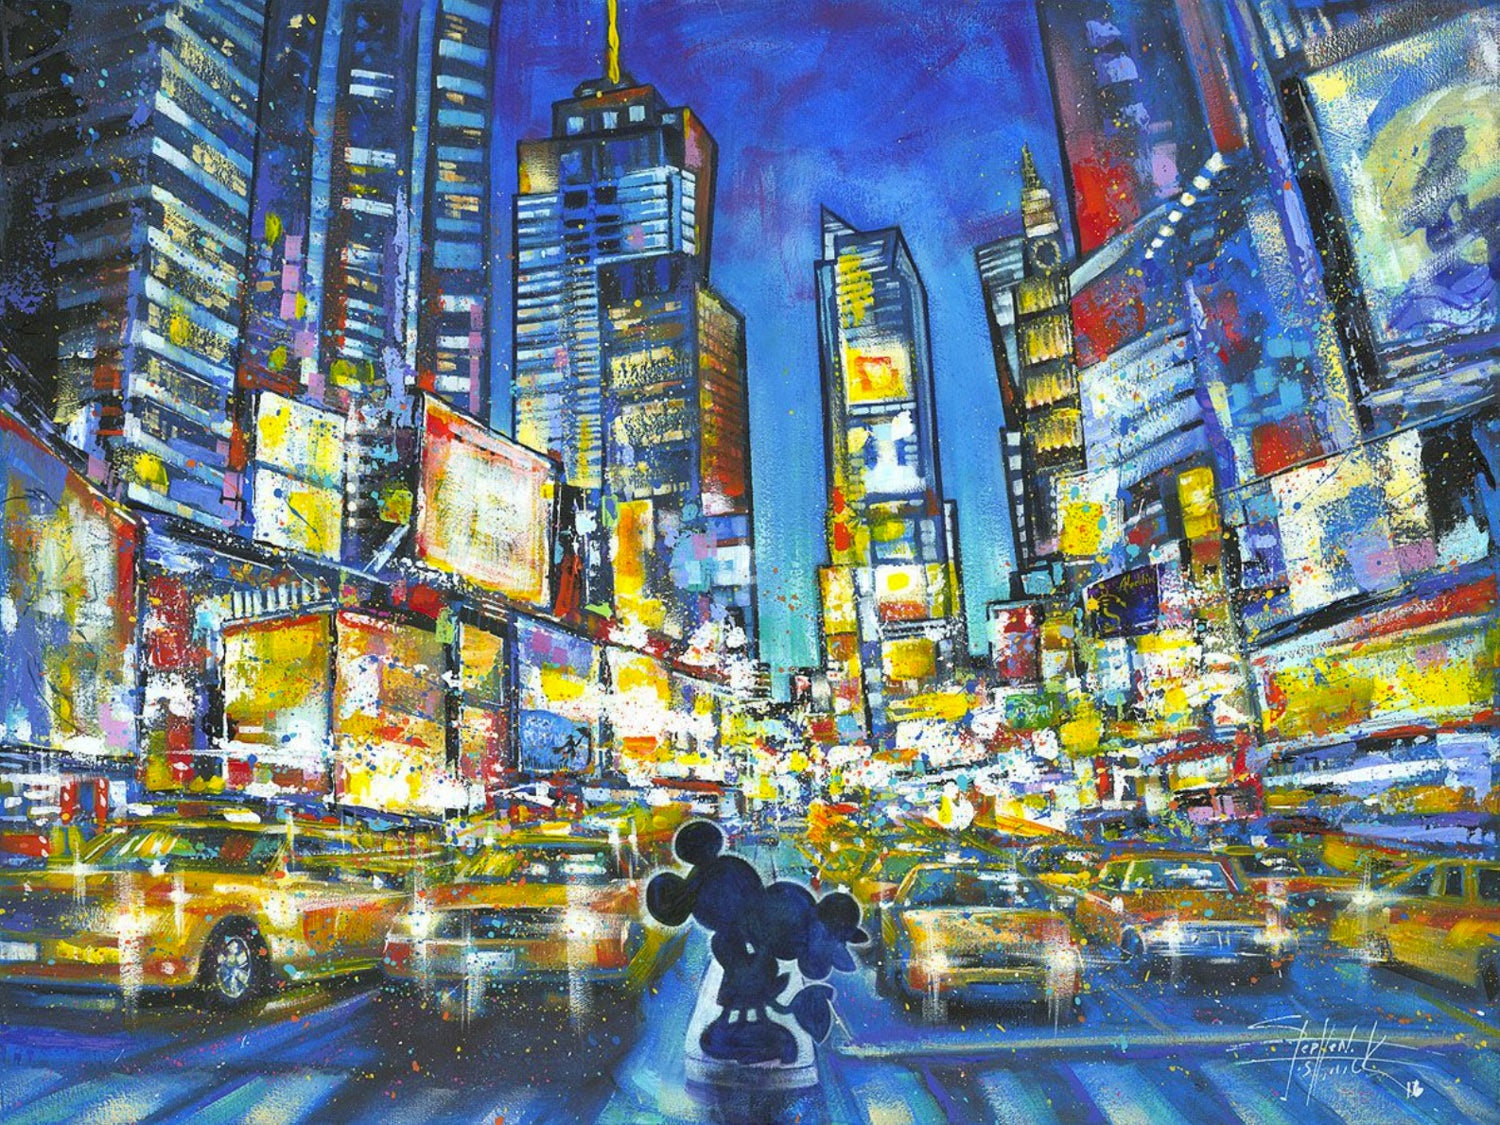 Stephen Fishwick Disney "You, Me and the City" Limited Edition Canvas Giclee